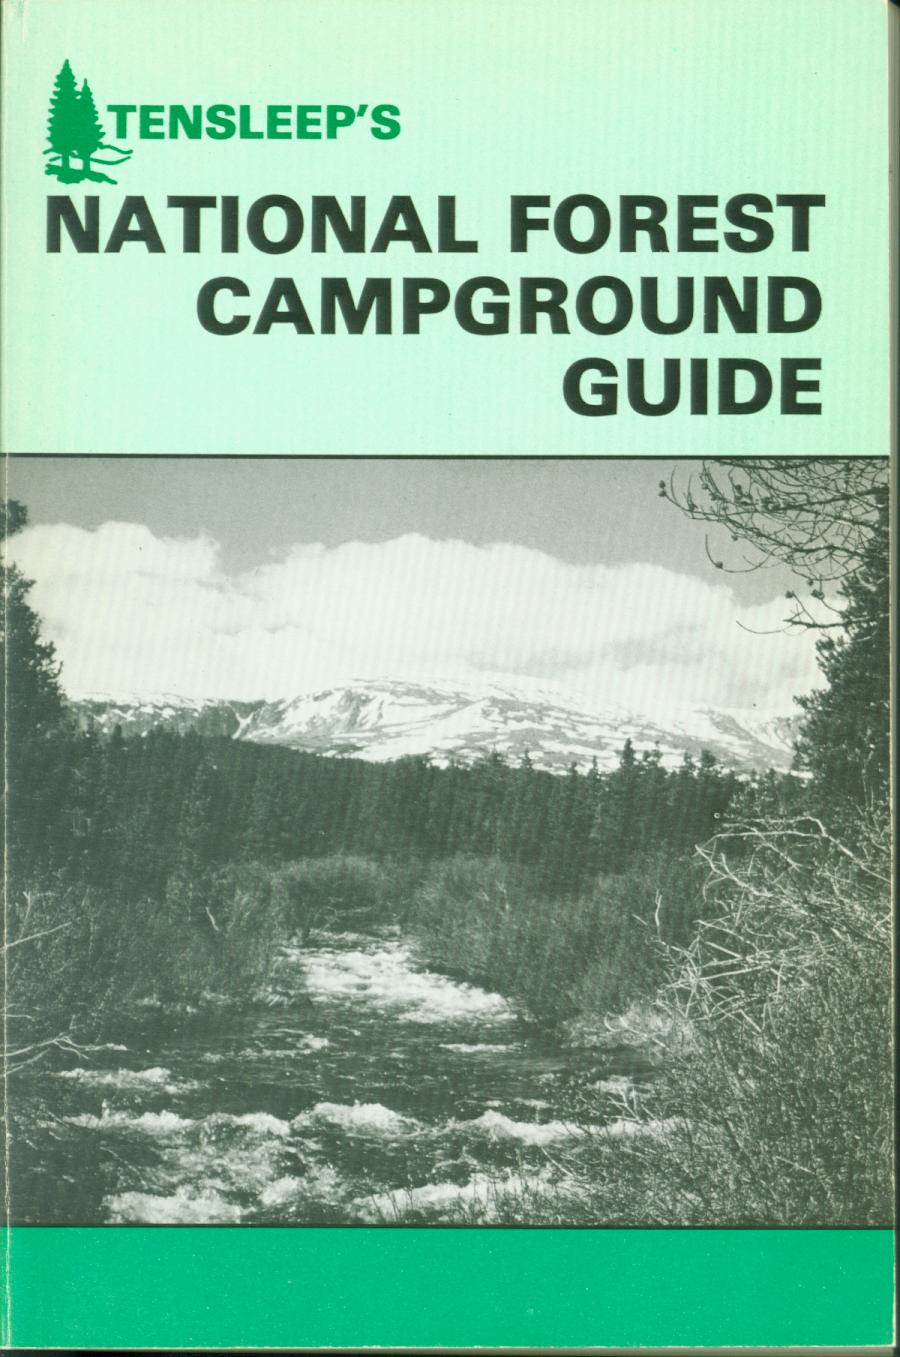 TENSLEEP'S NATIONAL FOREST CAMPGROUND GUIDE: a recreational guide to Ameridca's national forests.